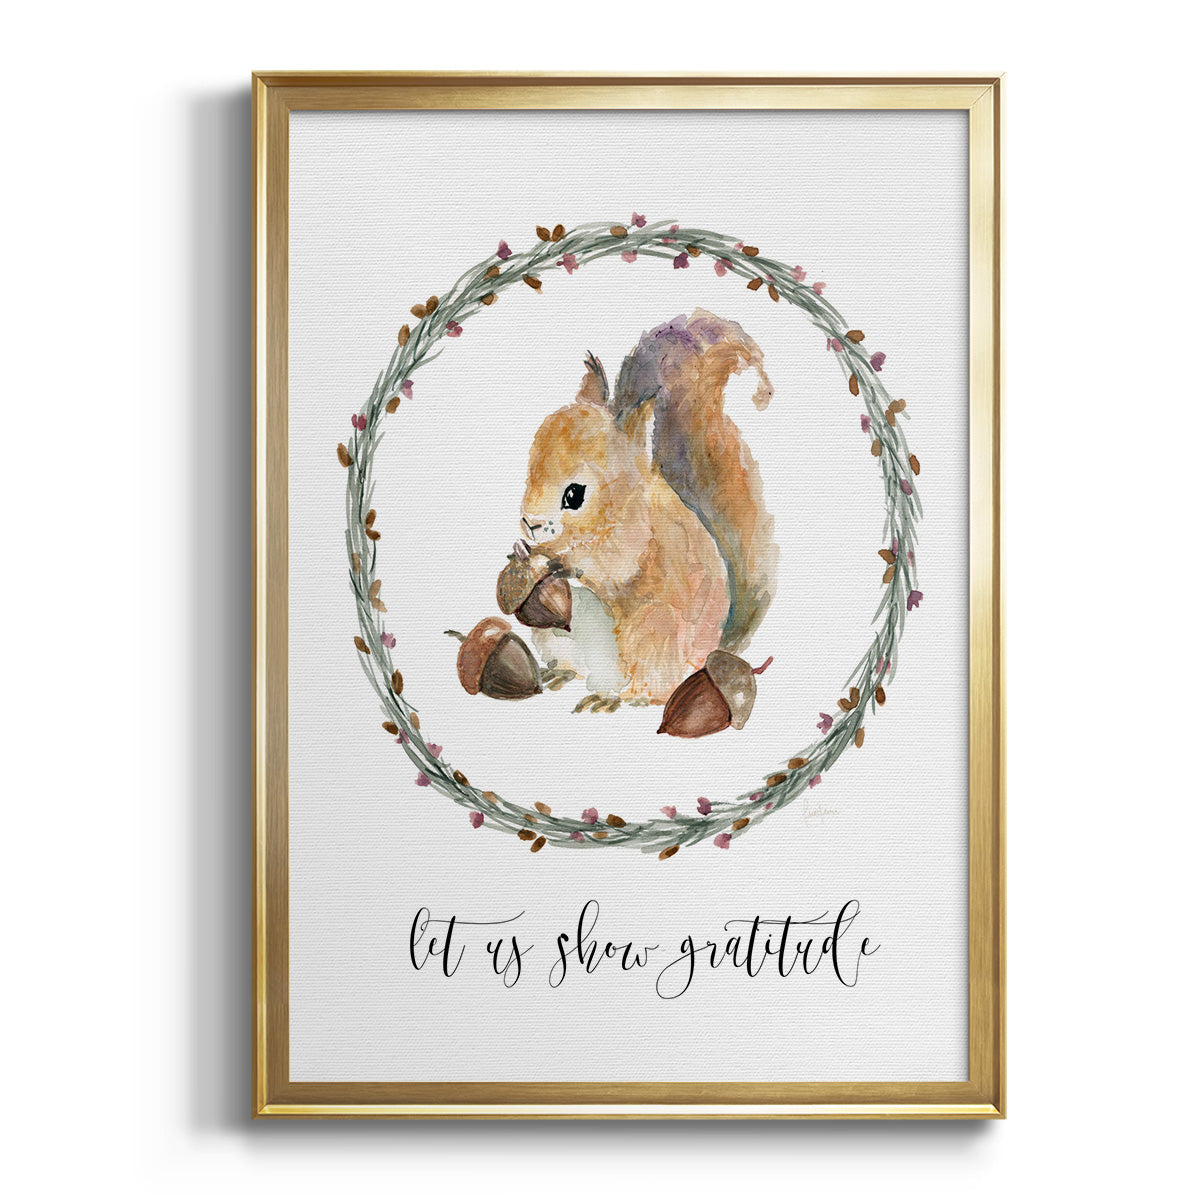 Harvest Home Squirrel Premium Framed Print - Ready to Hang